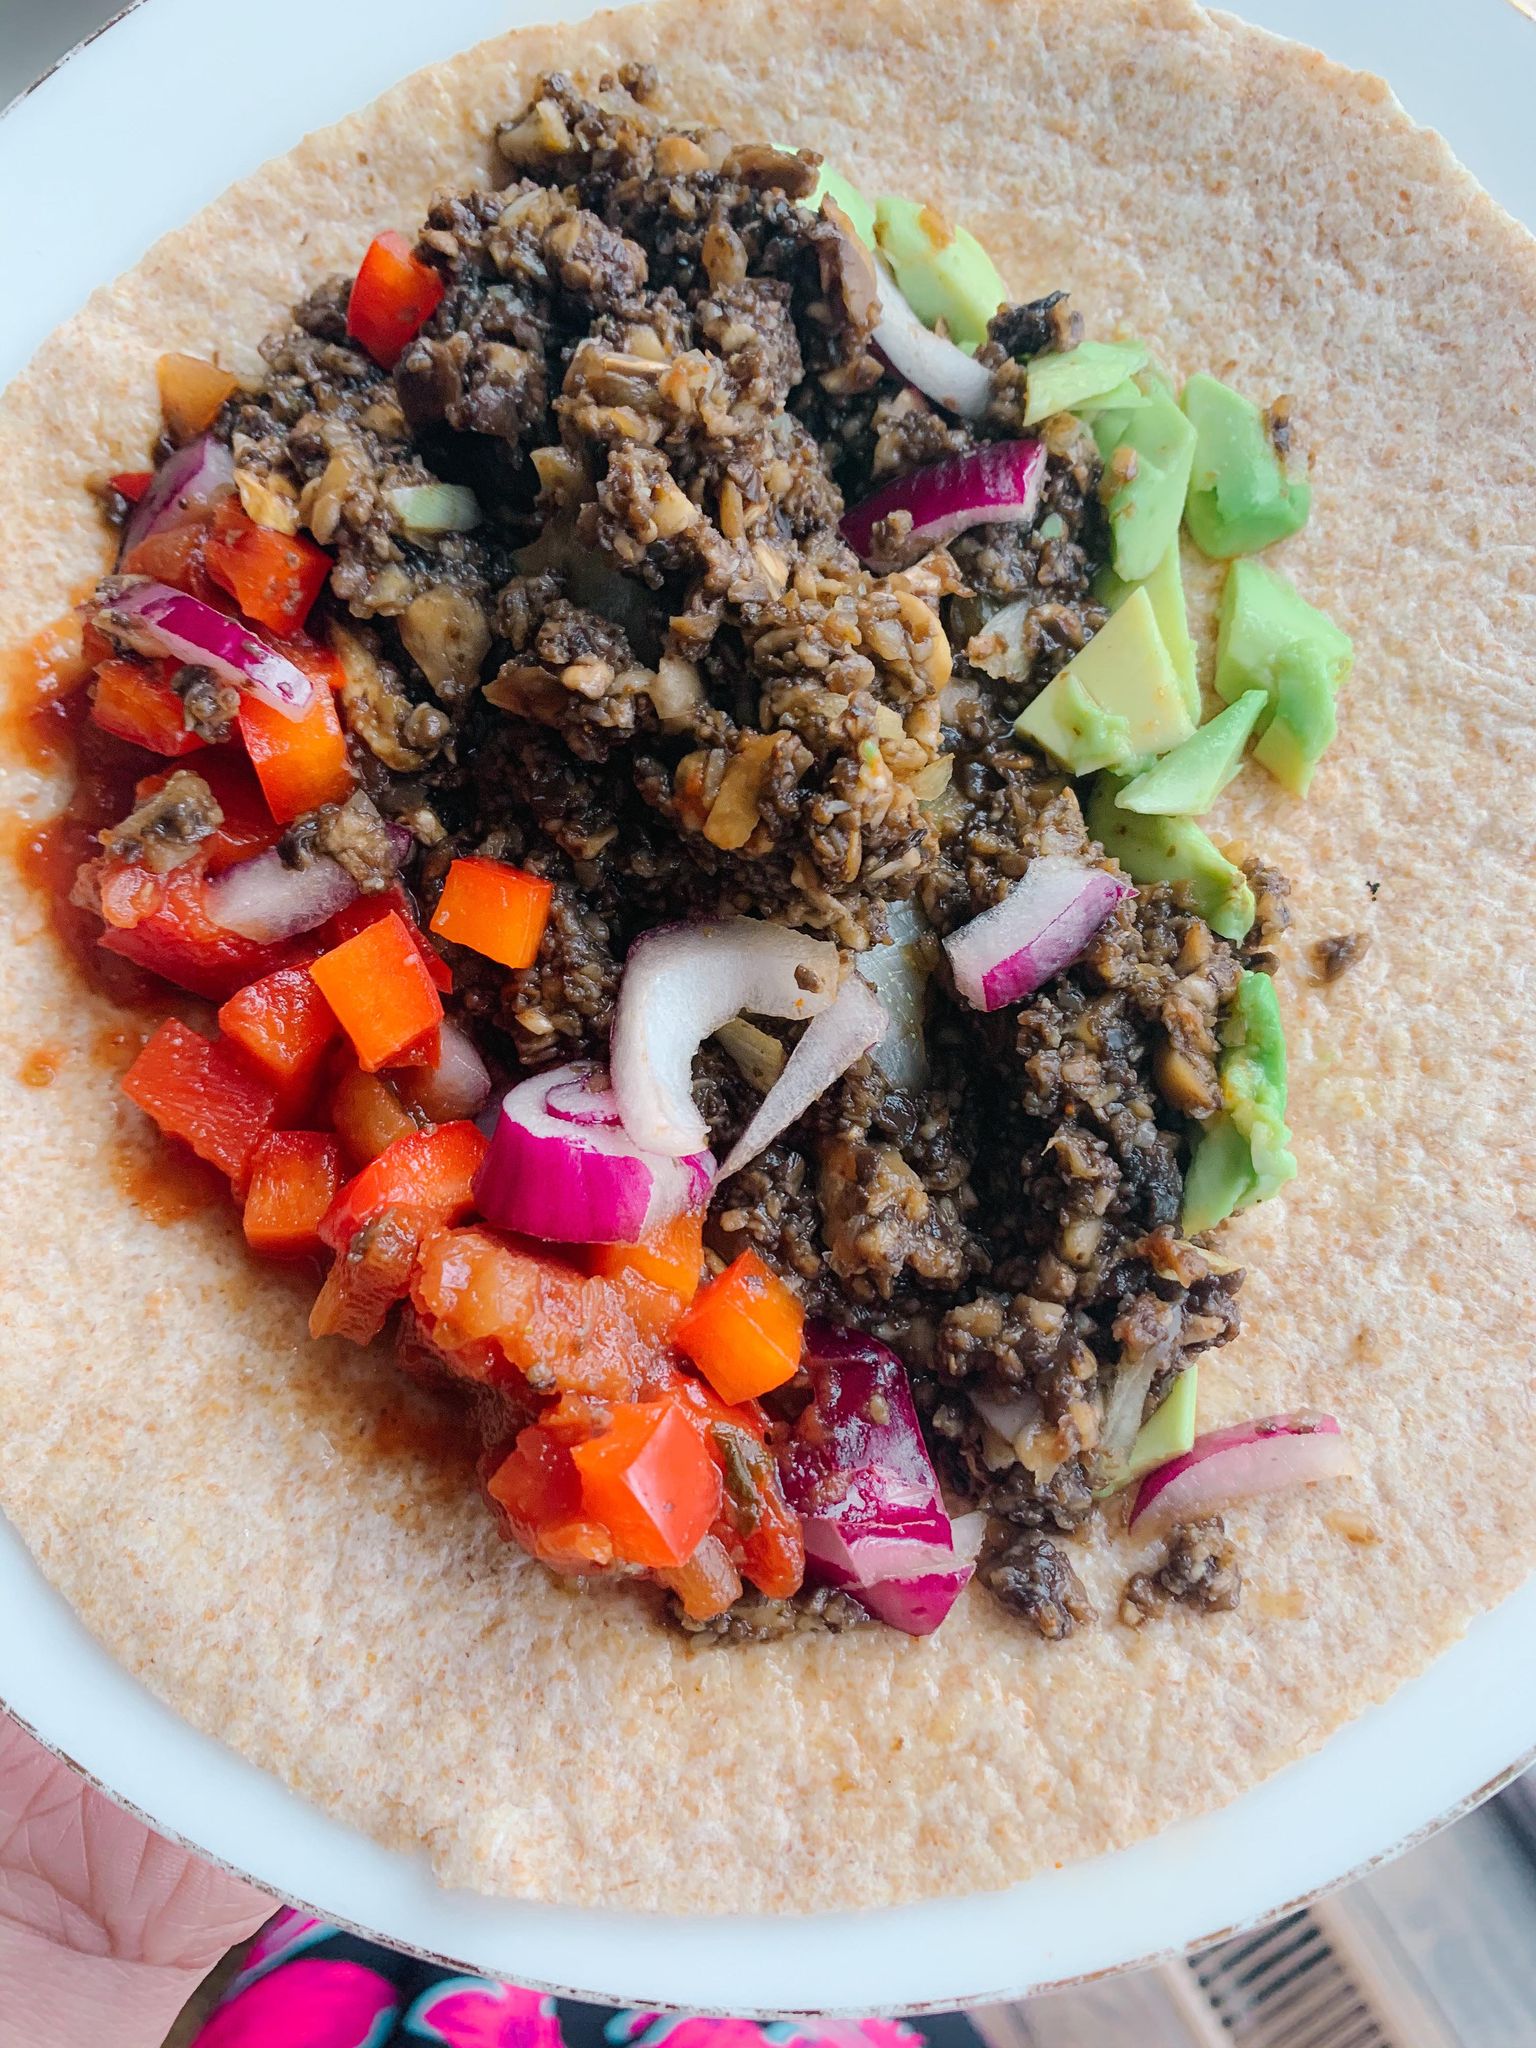 Vegan Tacos in 15 minutes (wfpb, oil-free) - PlantYou